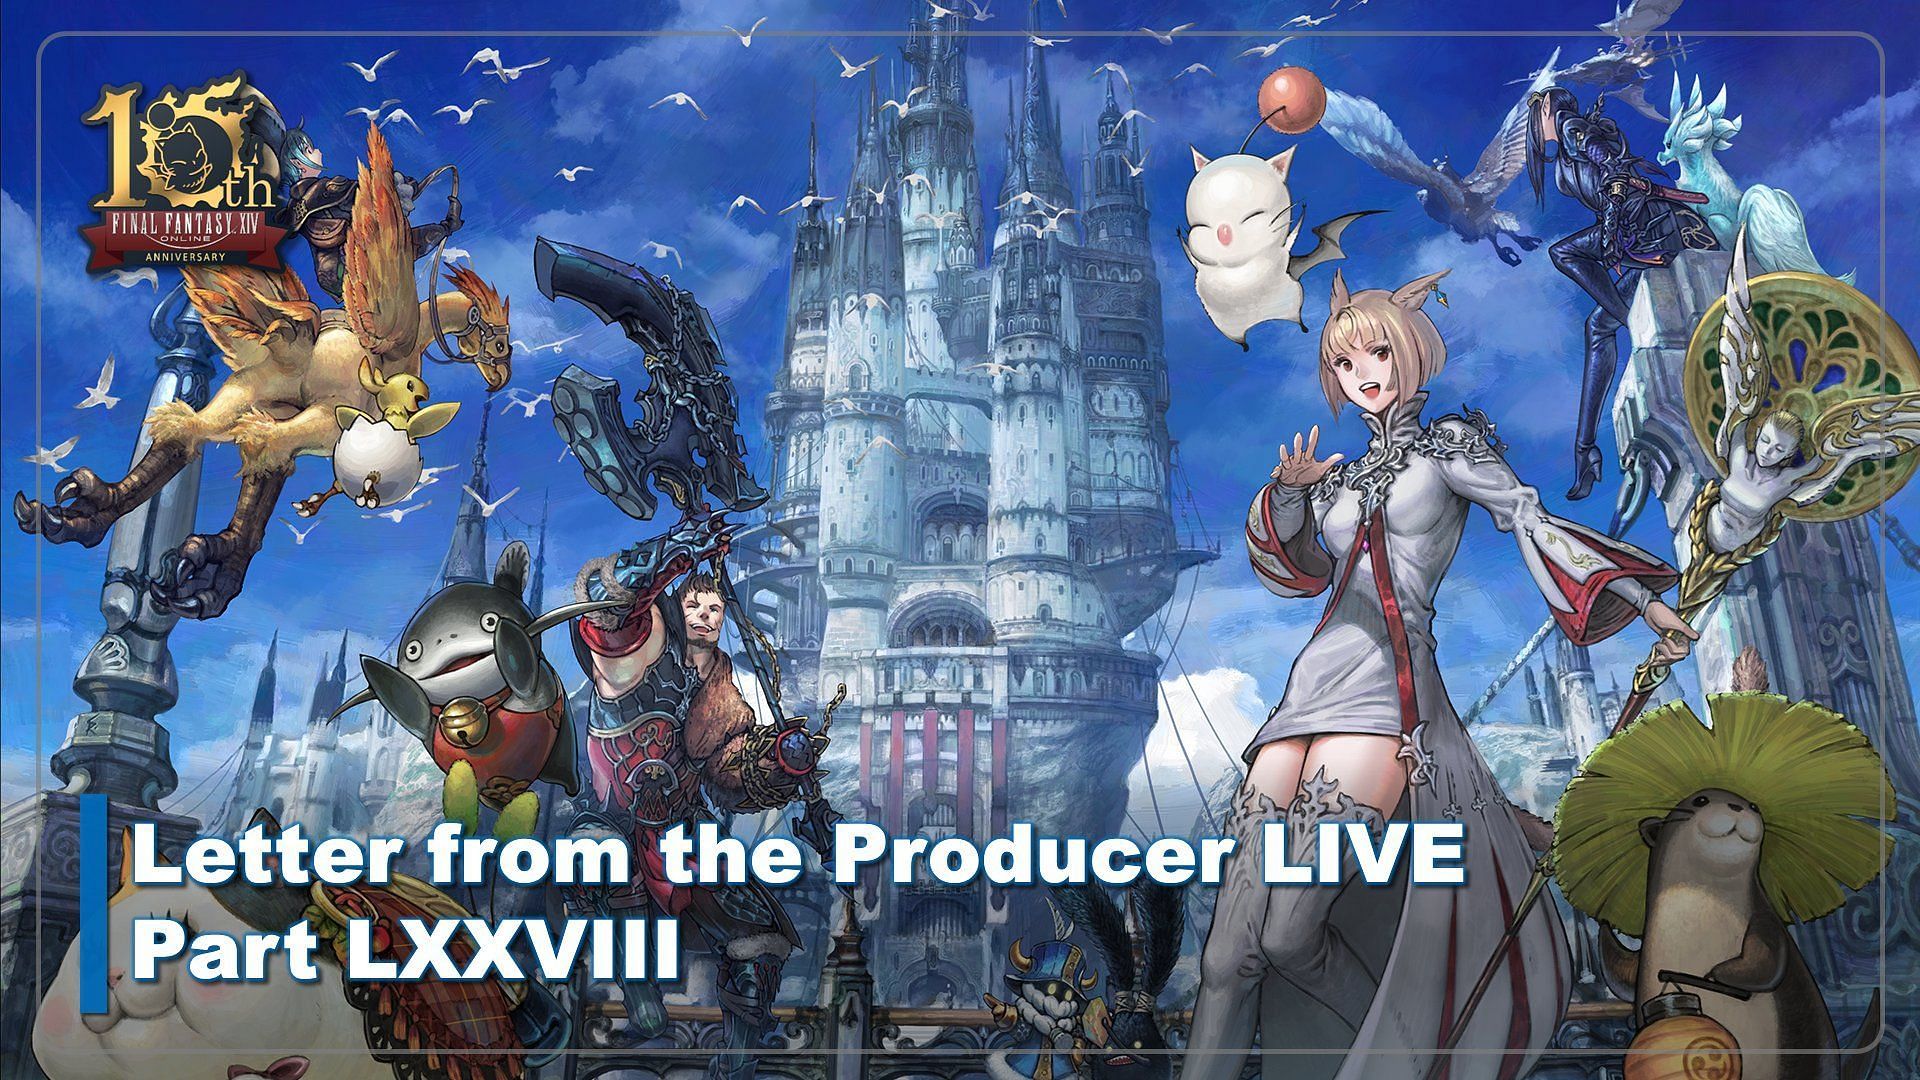 The Live Letter gave fans plenty of teasers for upcoming content (Image via Square Enix)